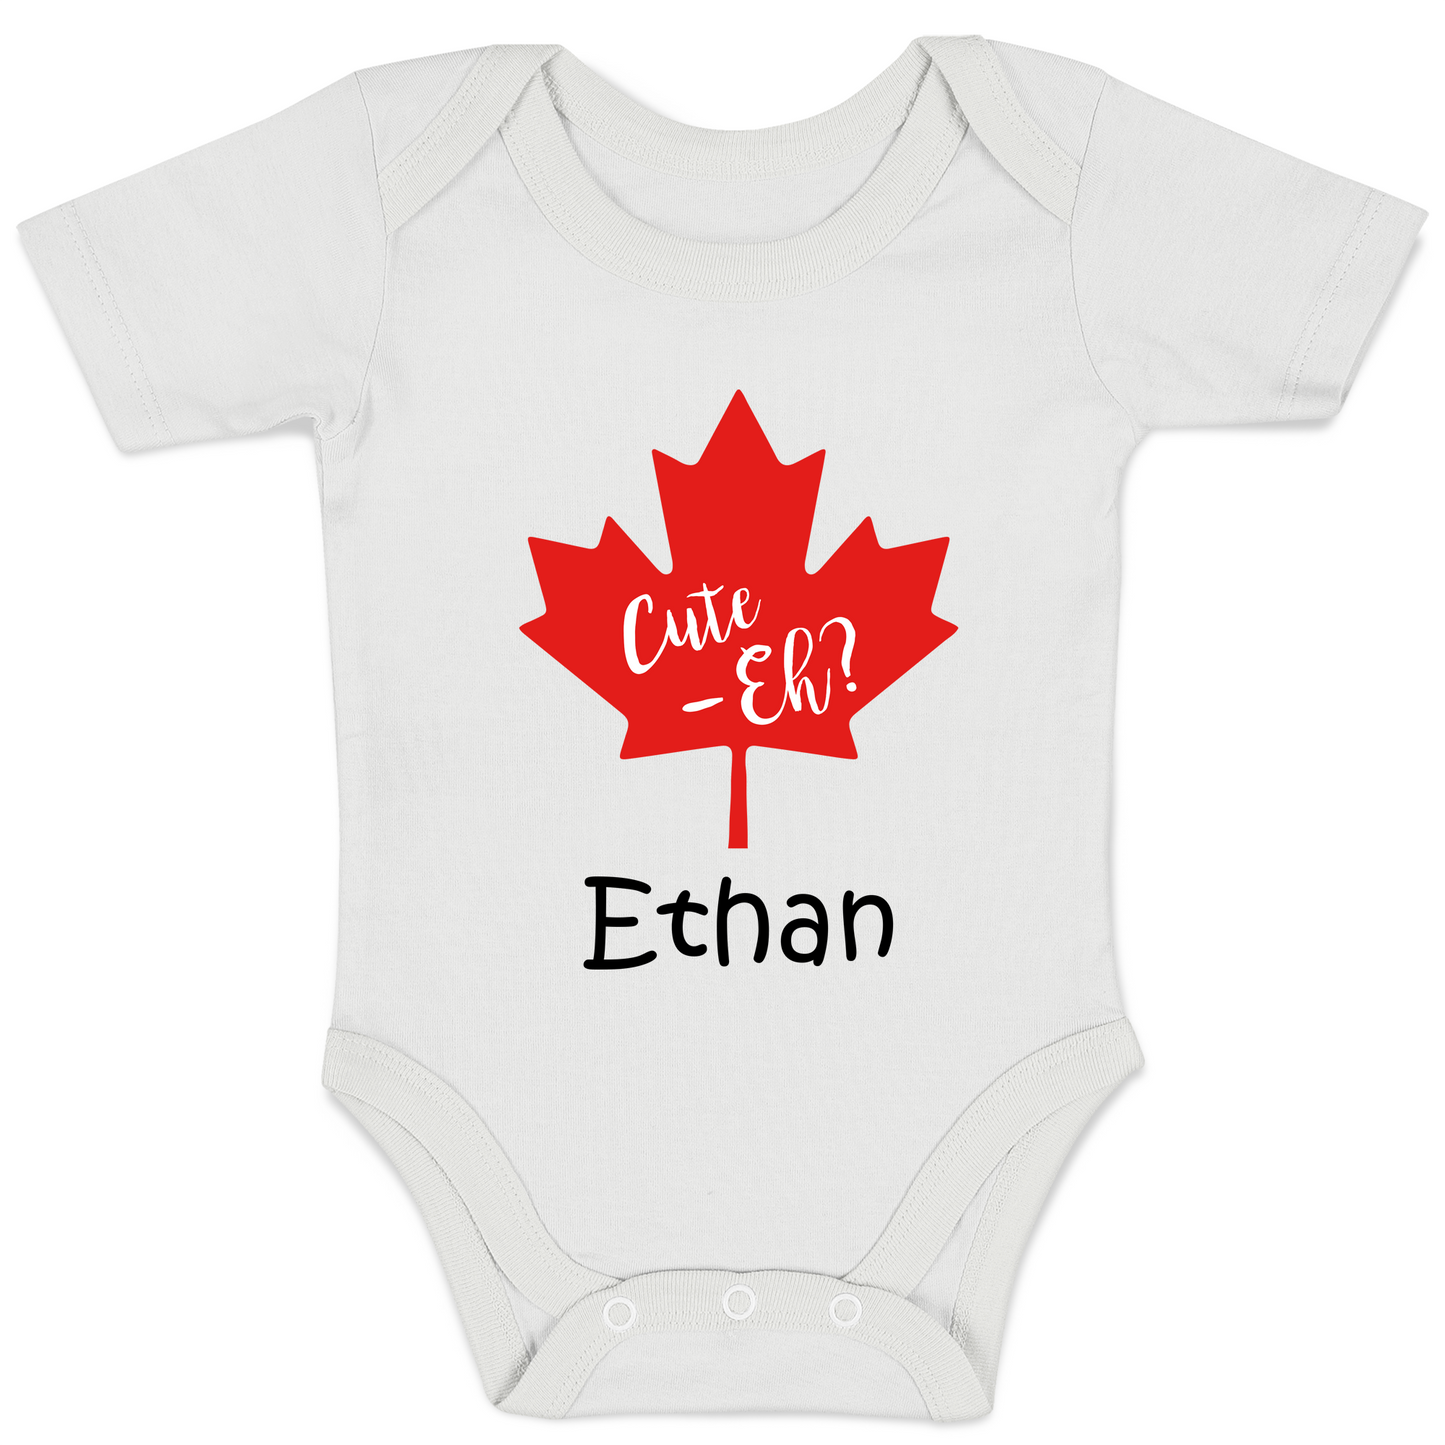 [Personalized] Endanzoo Organic Baby Bodysuit - Canada's Cute Eh